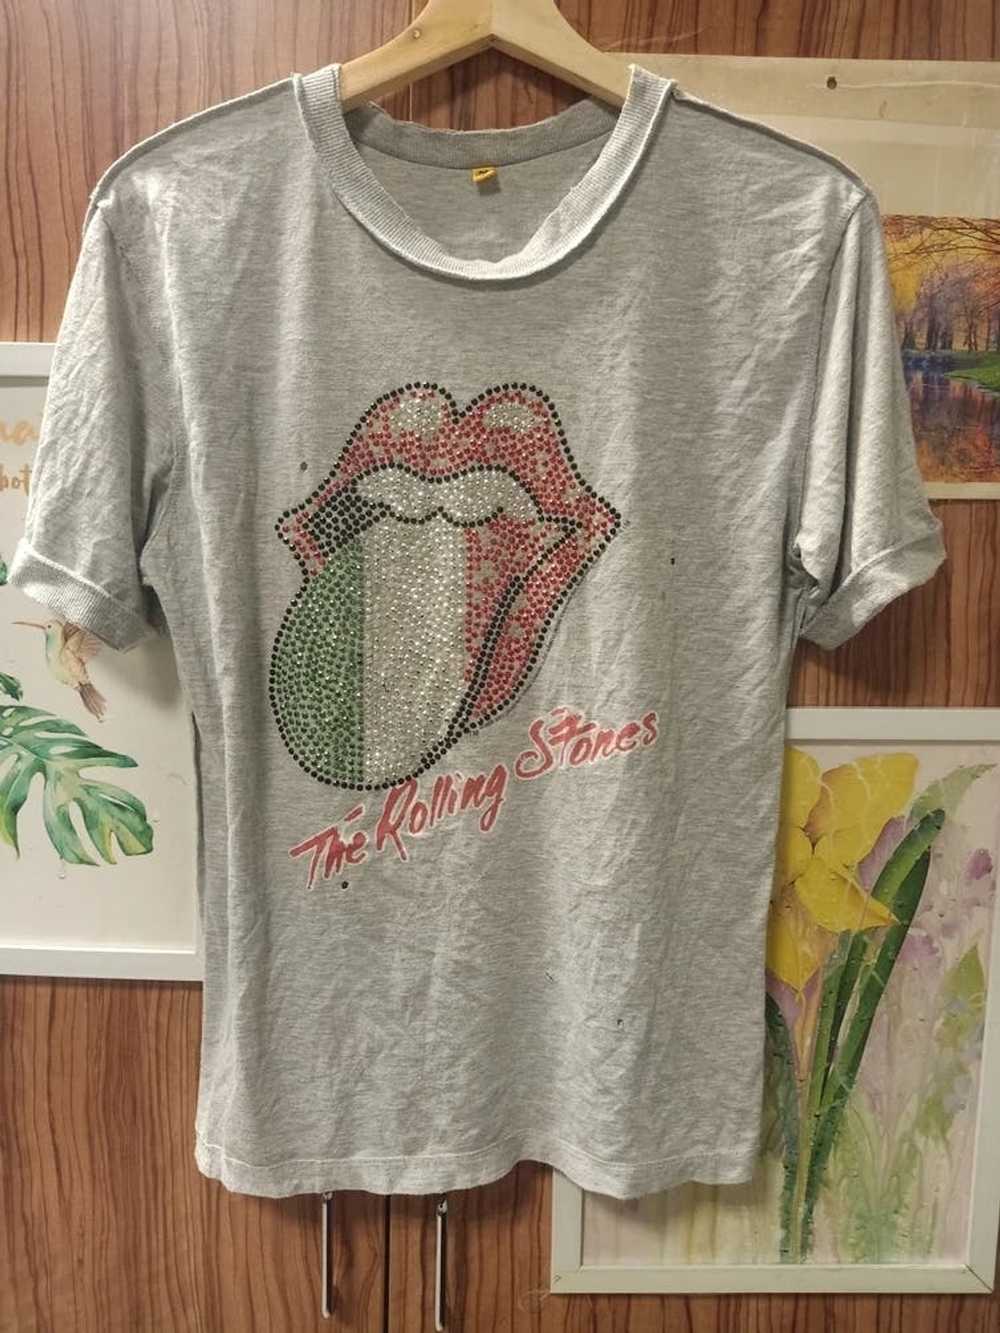 Band Tees × The Rolling Stones × Vintage Rare Rol… - image 1